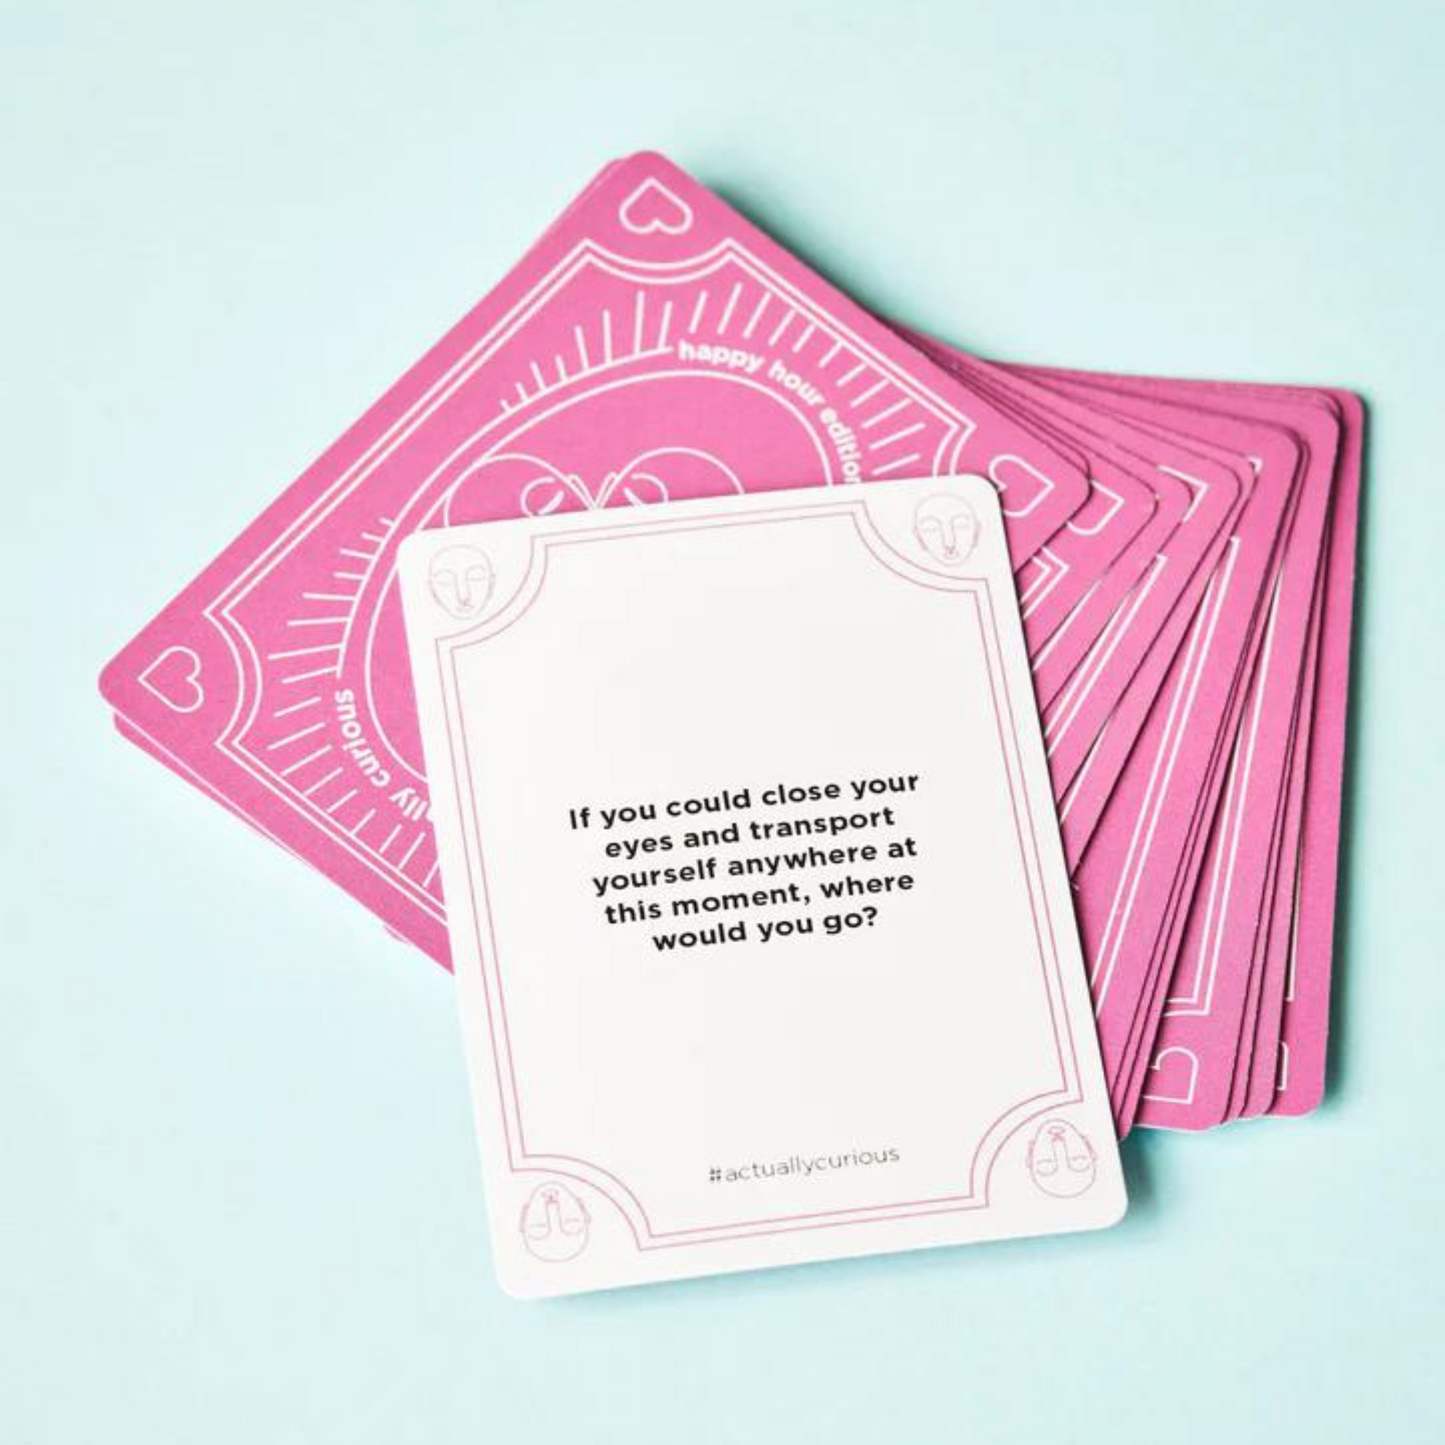 deck of cards with top card displayed with "If you could close your eyes and transport yourself anywhere at this moment, where would you go?" written on it